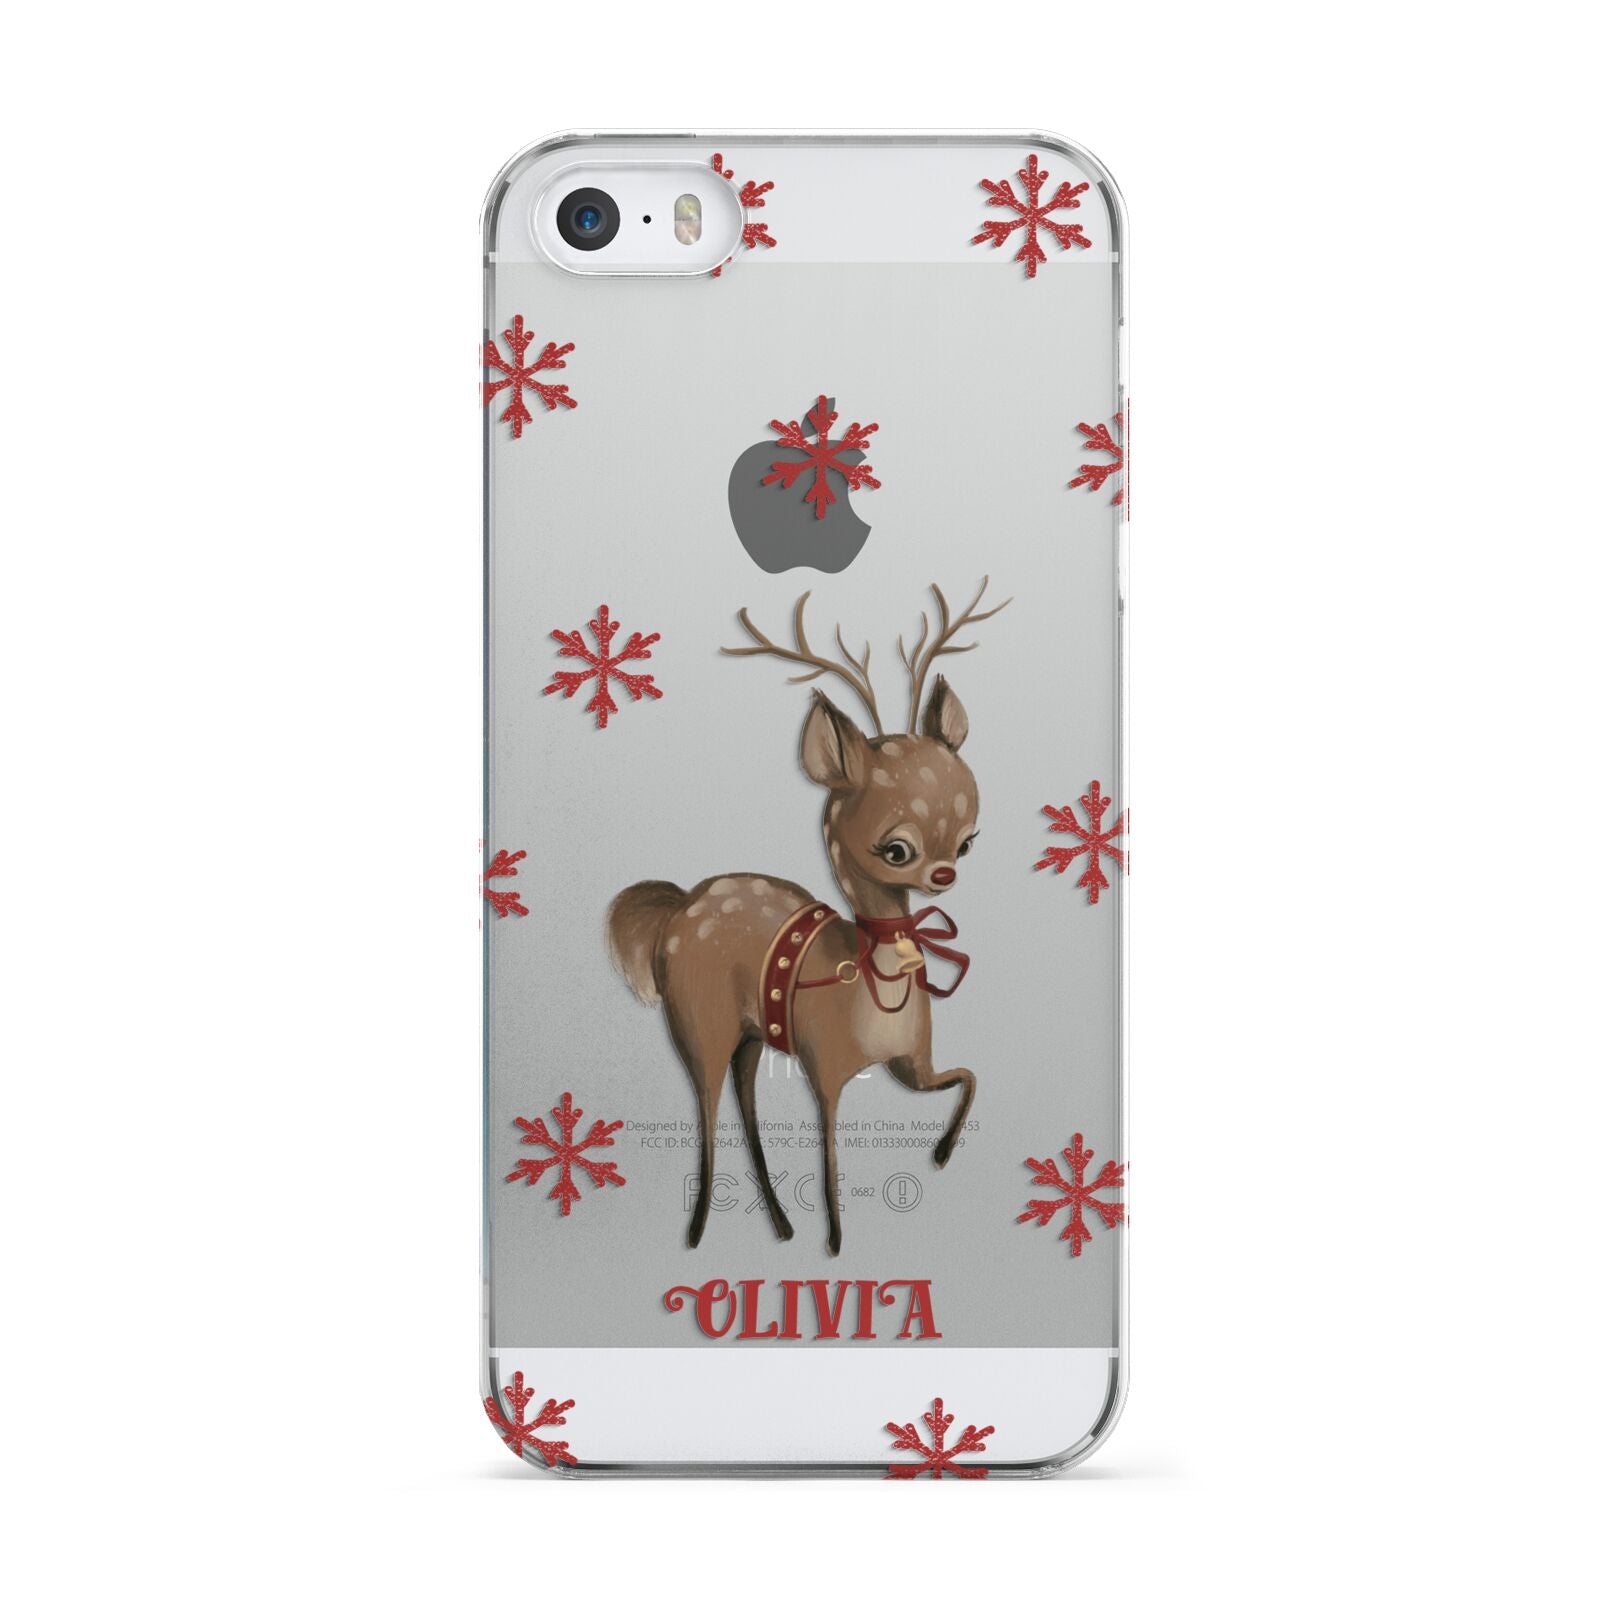 Rudolph Delivery Apple iPhone 5 Case